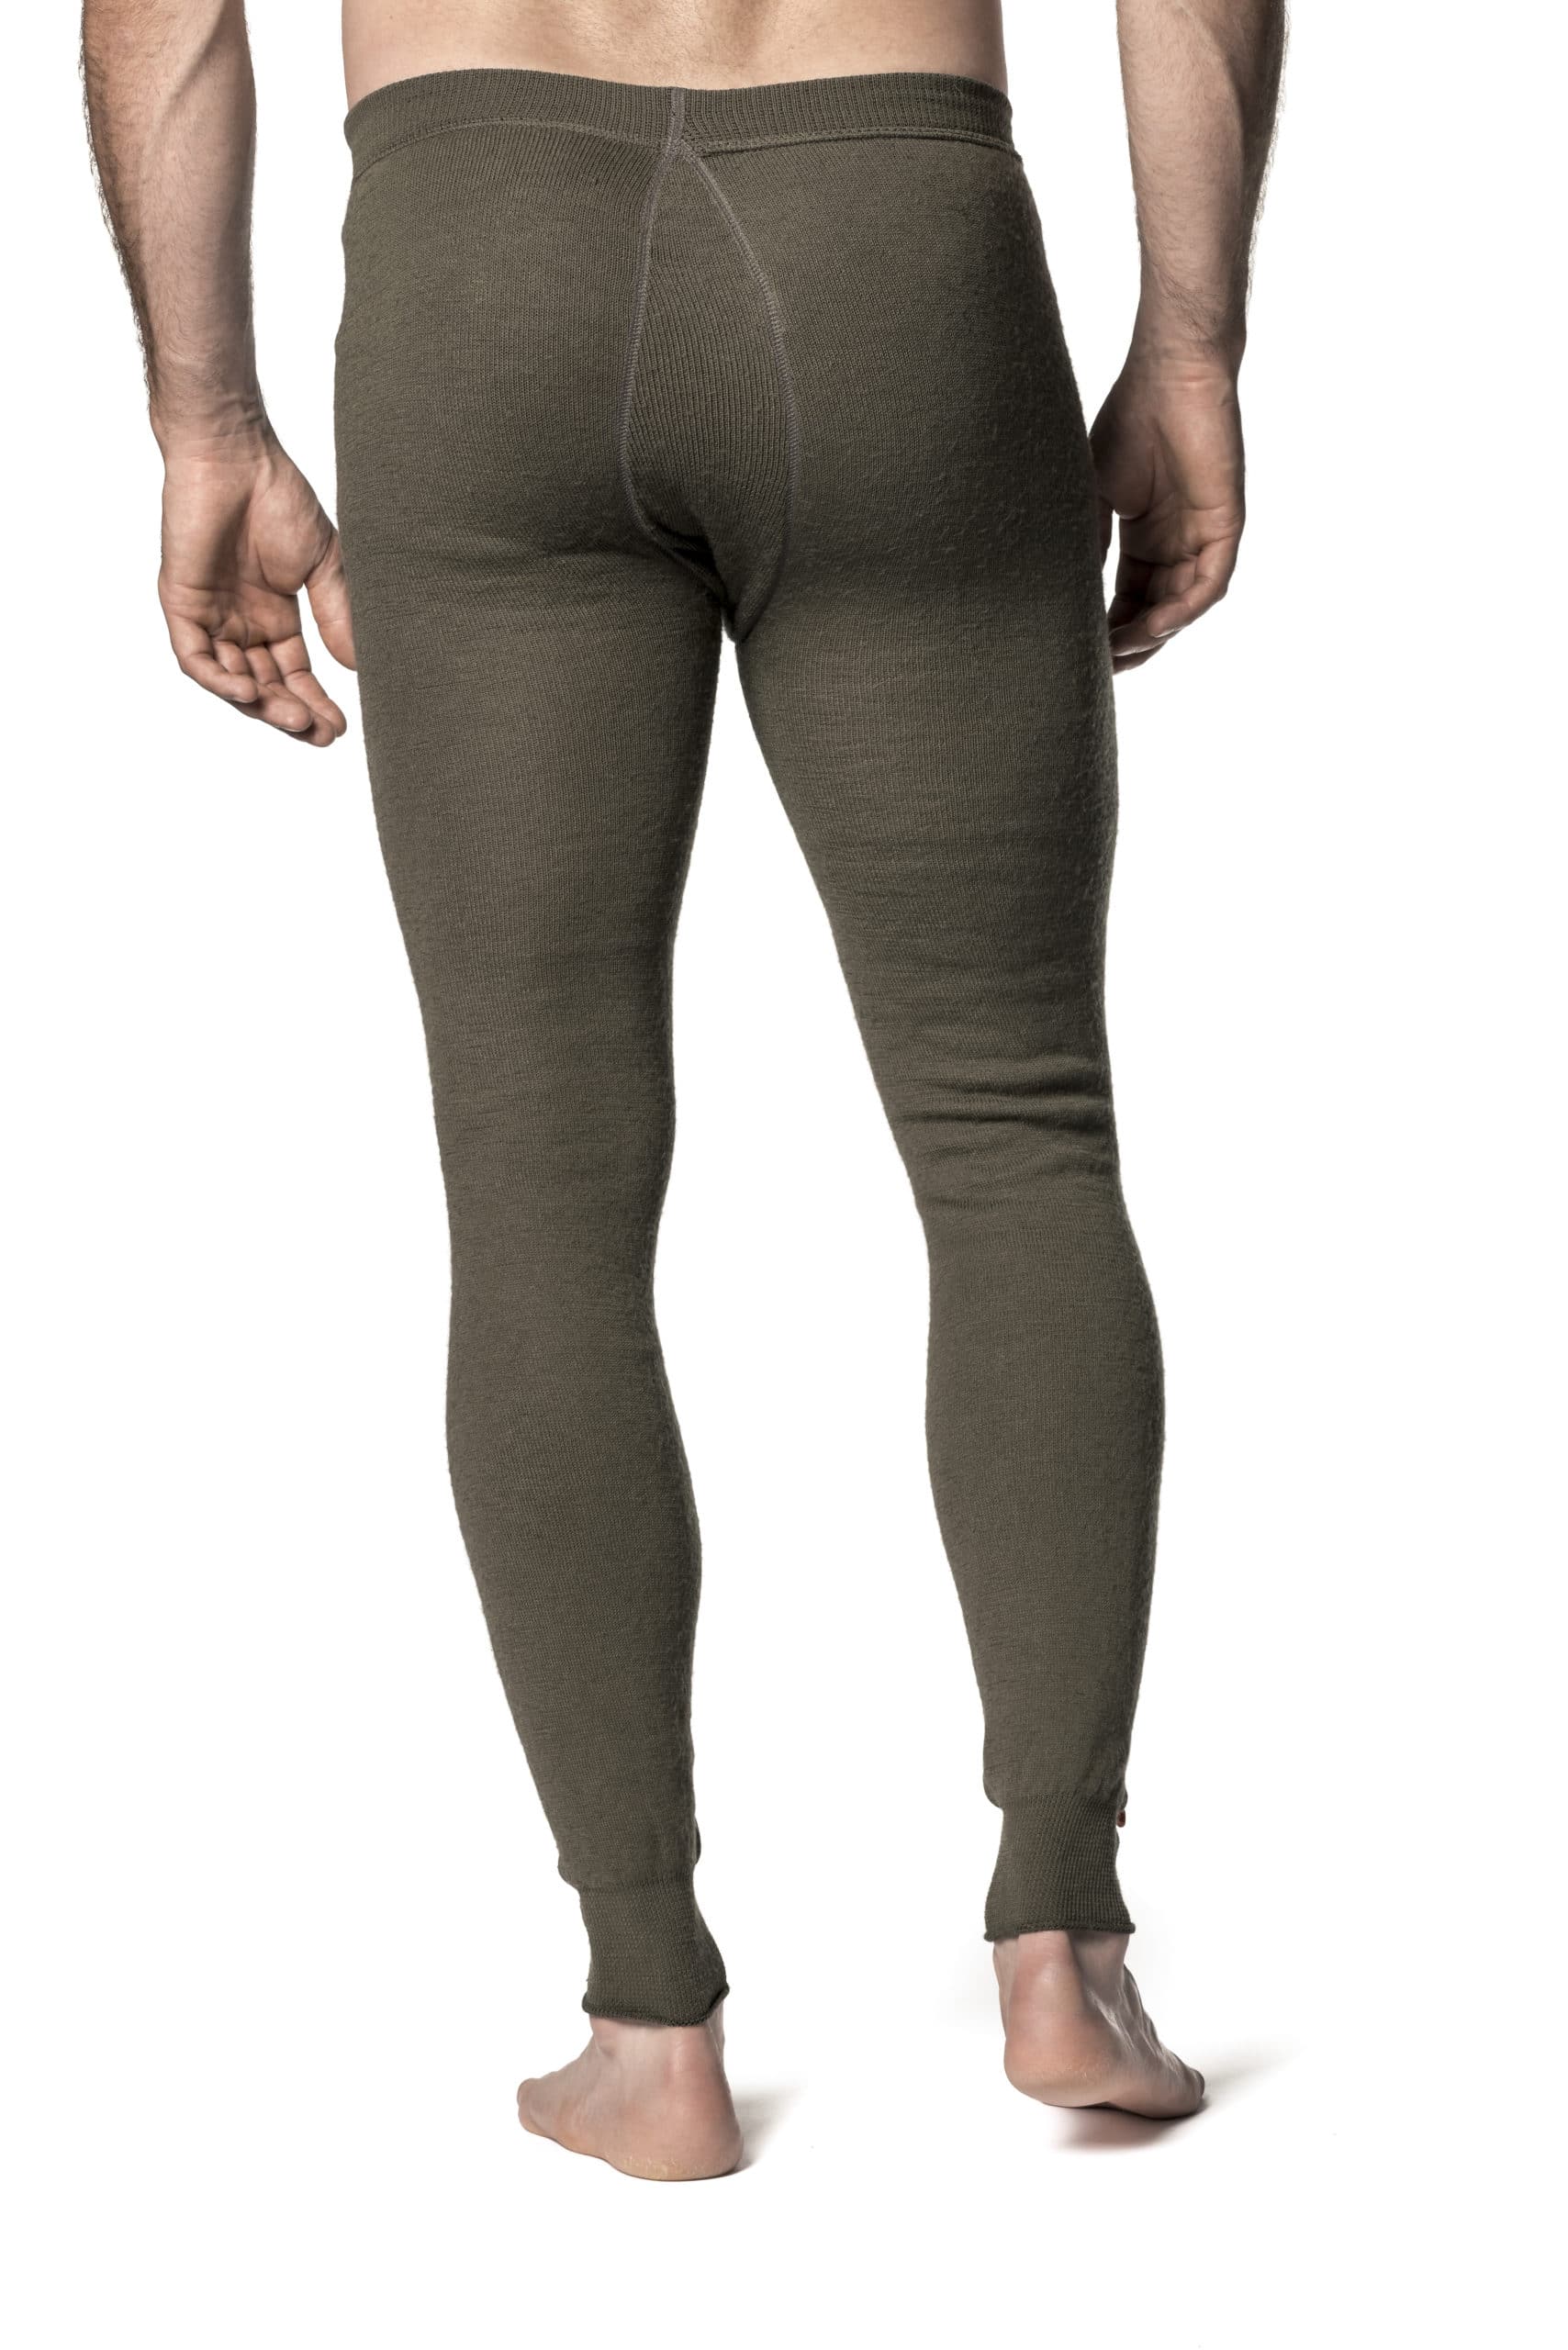 Woolpower Long Johns With Fly 200 - pine green